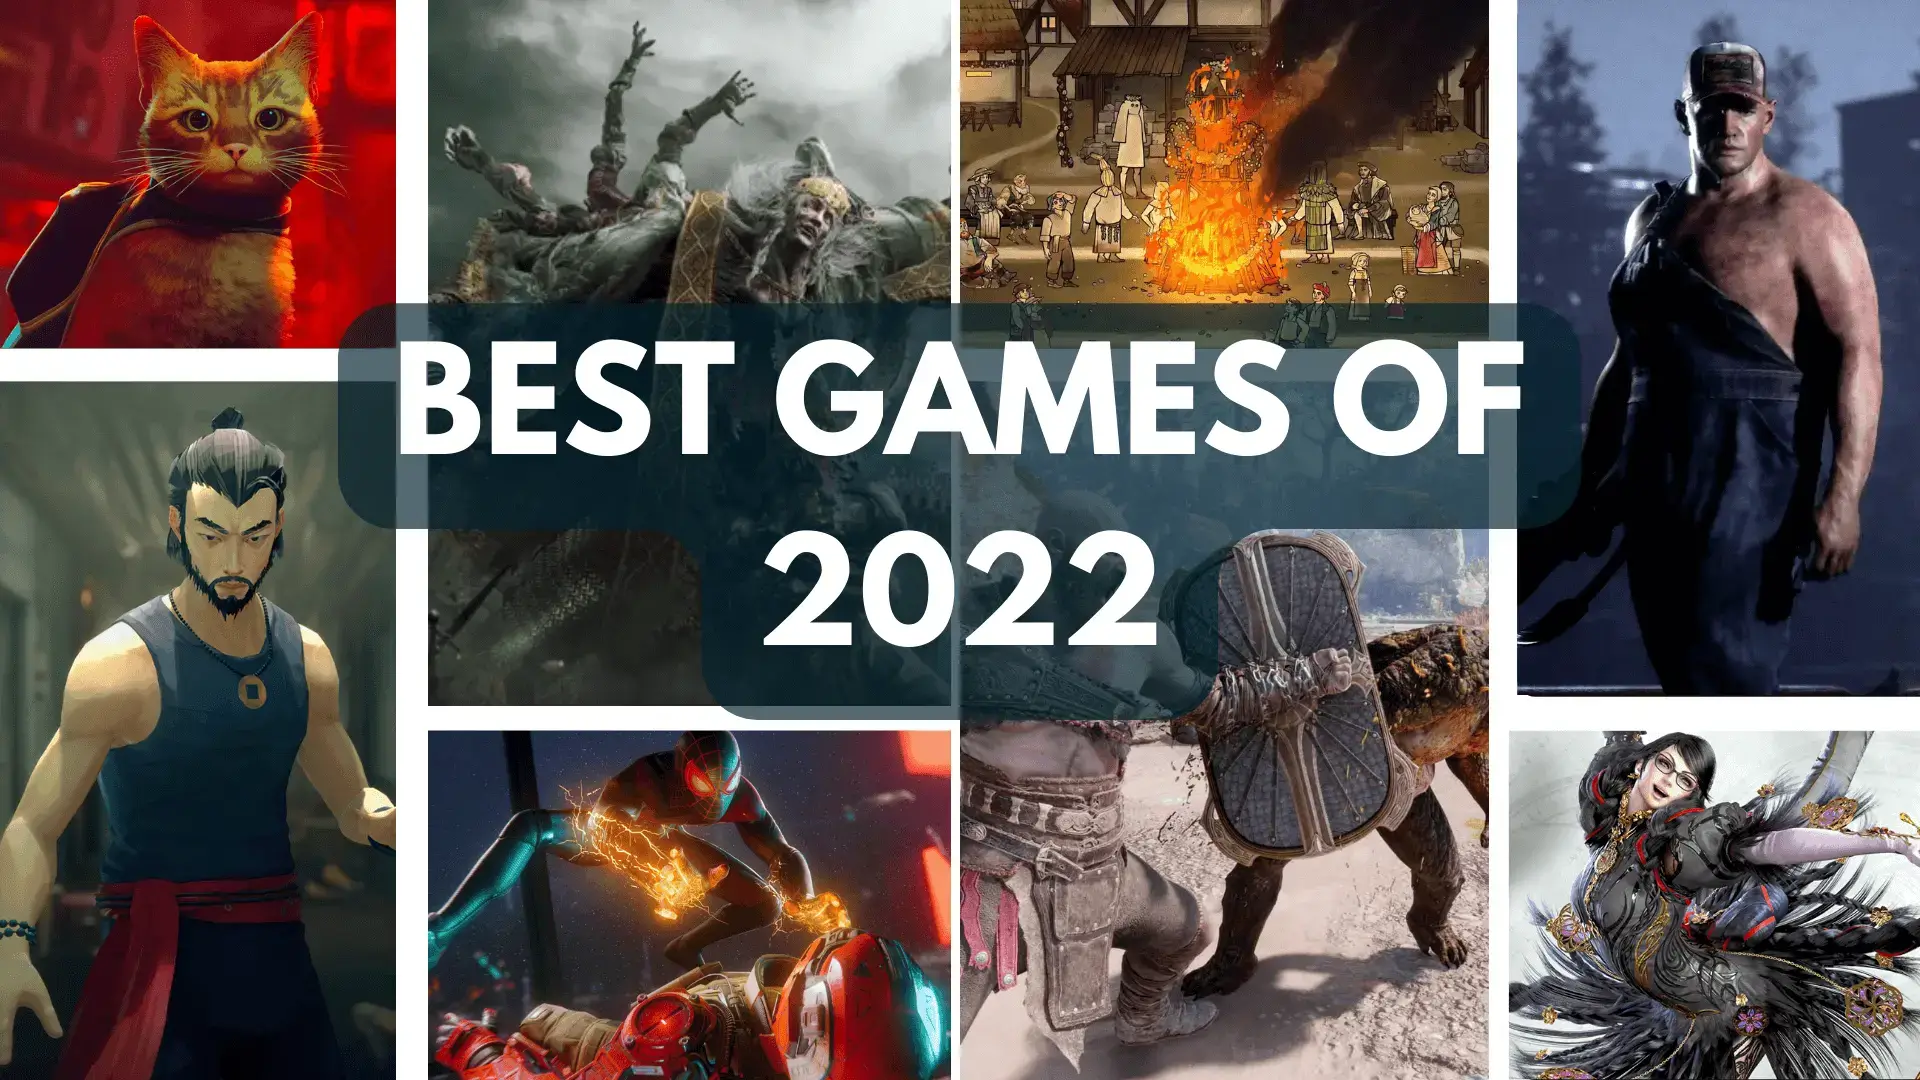 The best 10 games of 2022: From Elden Ring to Cult of Lamb